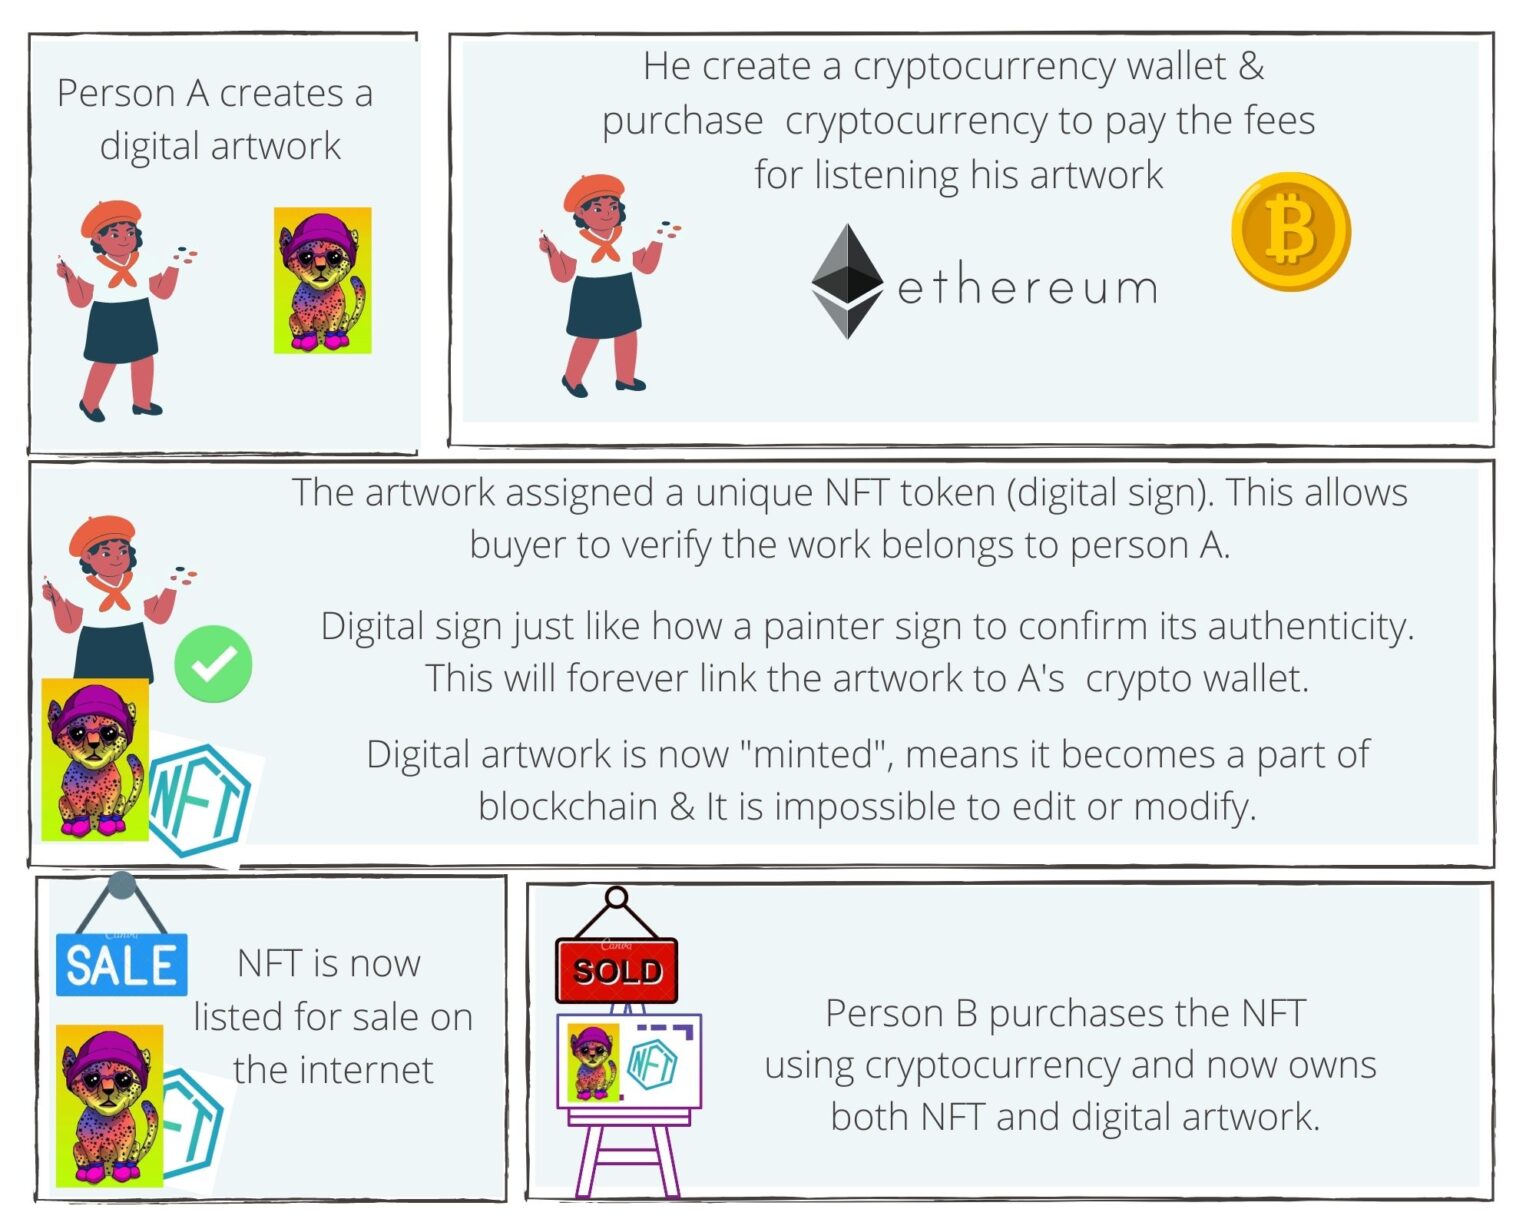 meaning of nft in crypto